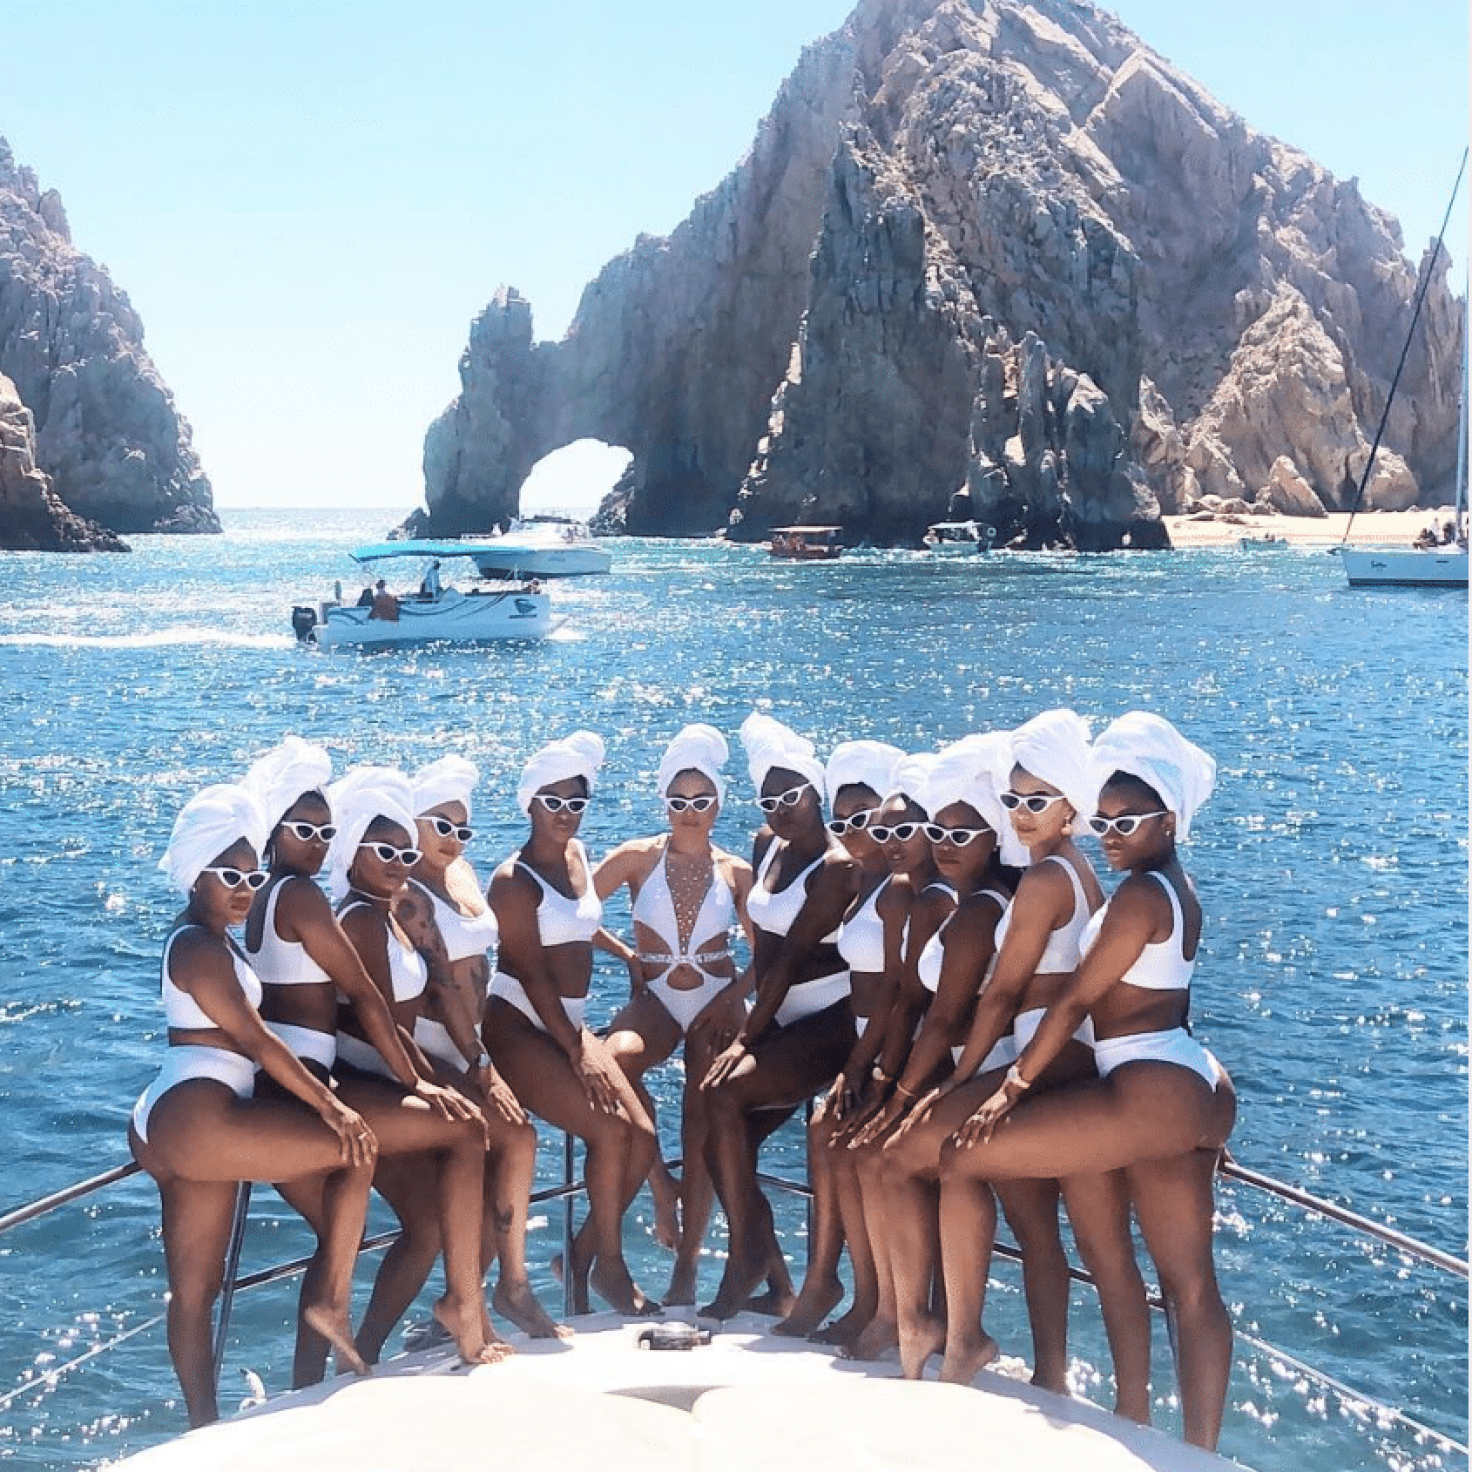 Black Wedding Moment Of The Day: This Bachelorette Squad Just Crushed Their Yacht Moment in Mexico